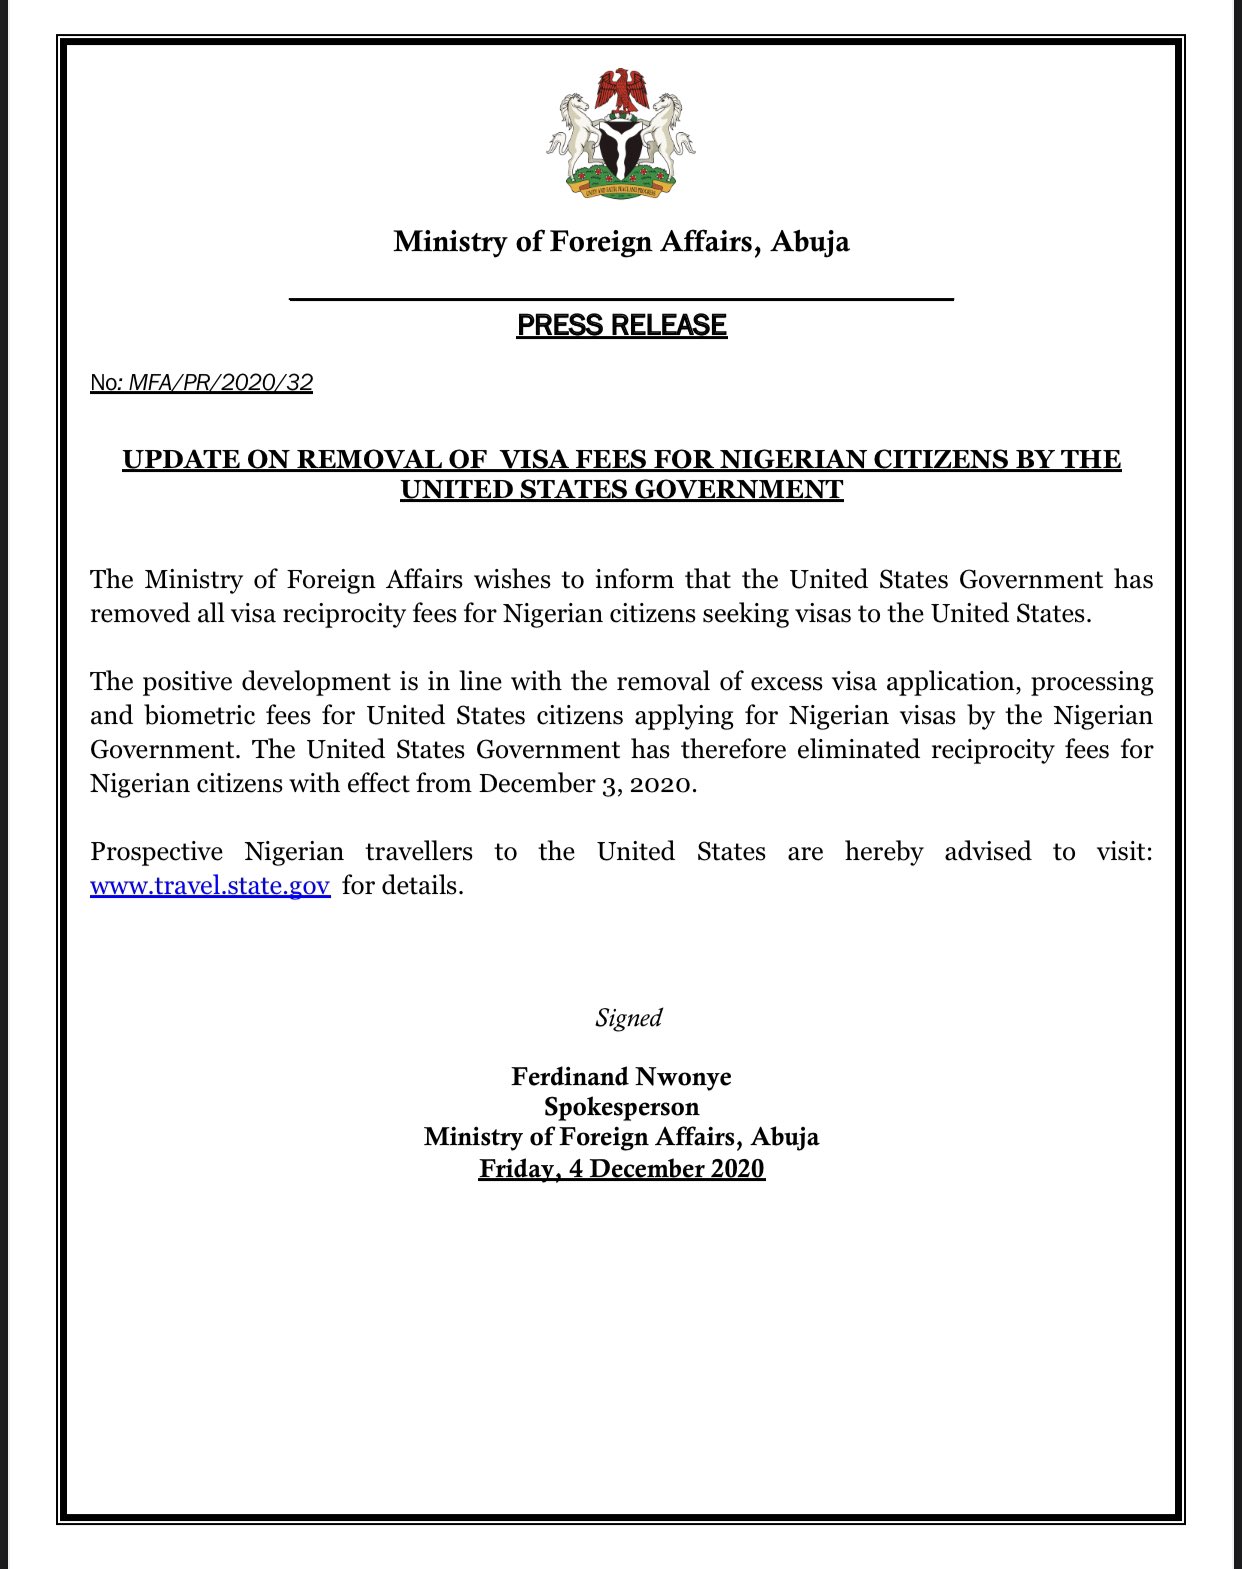 The Ministry of Foreign Affairs Press Release